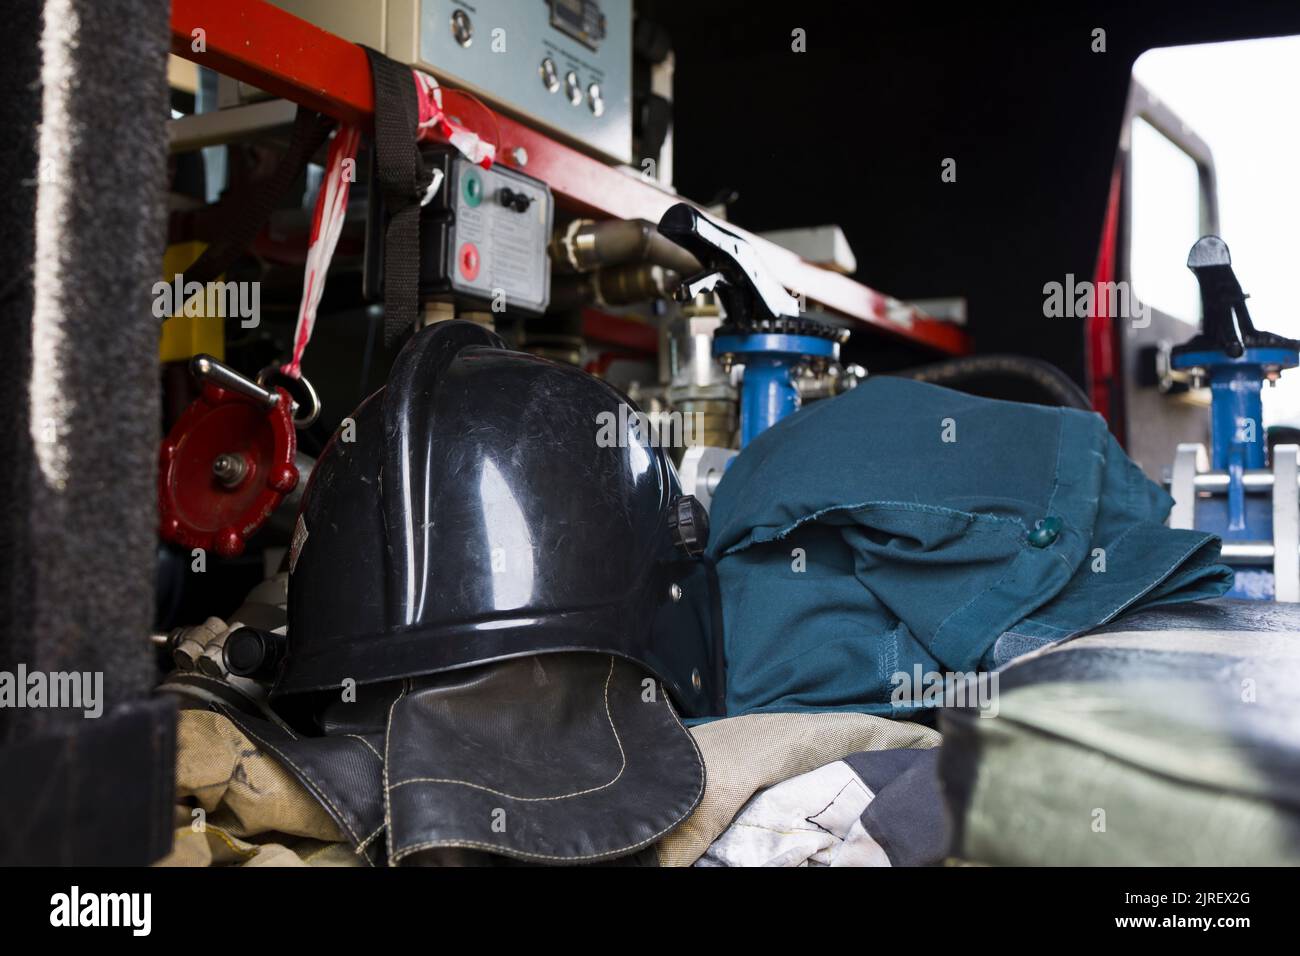 Firefighter protection clothes in the Fire engine Stock Photo